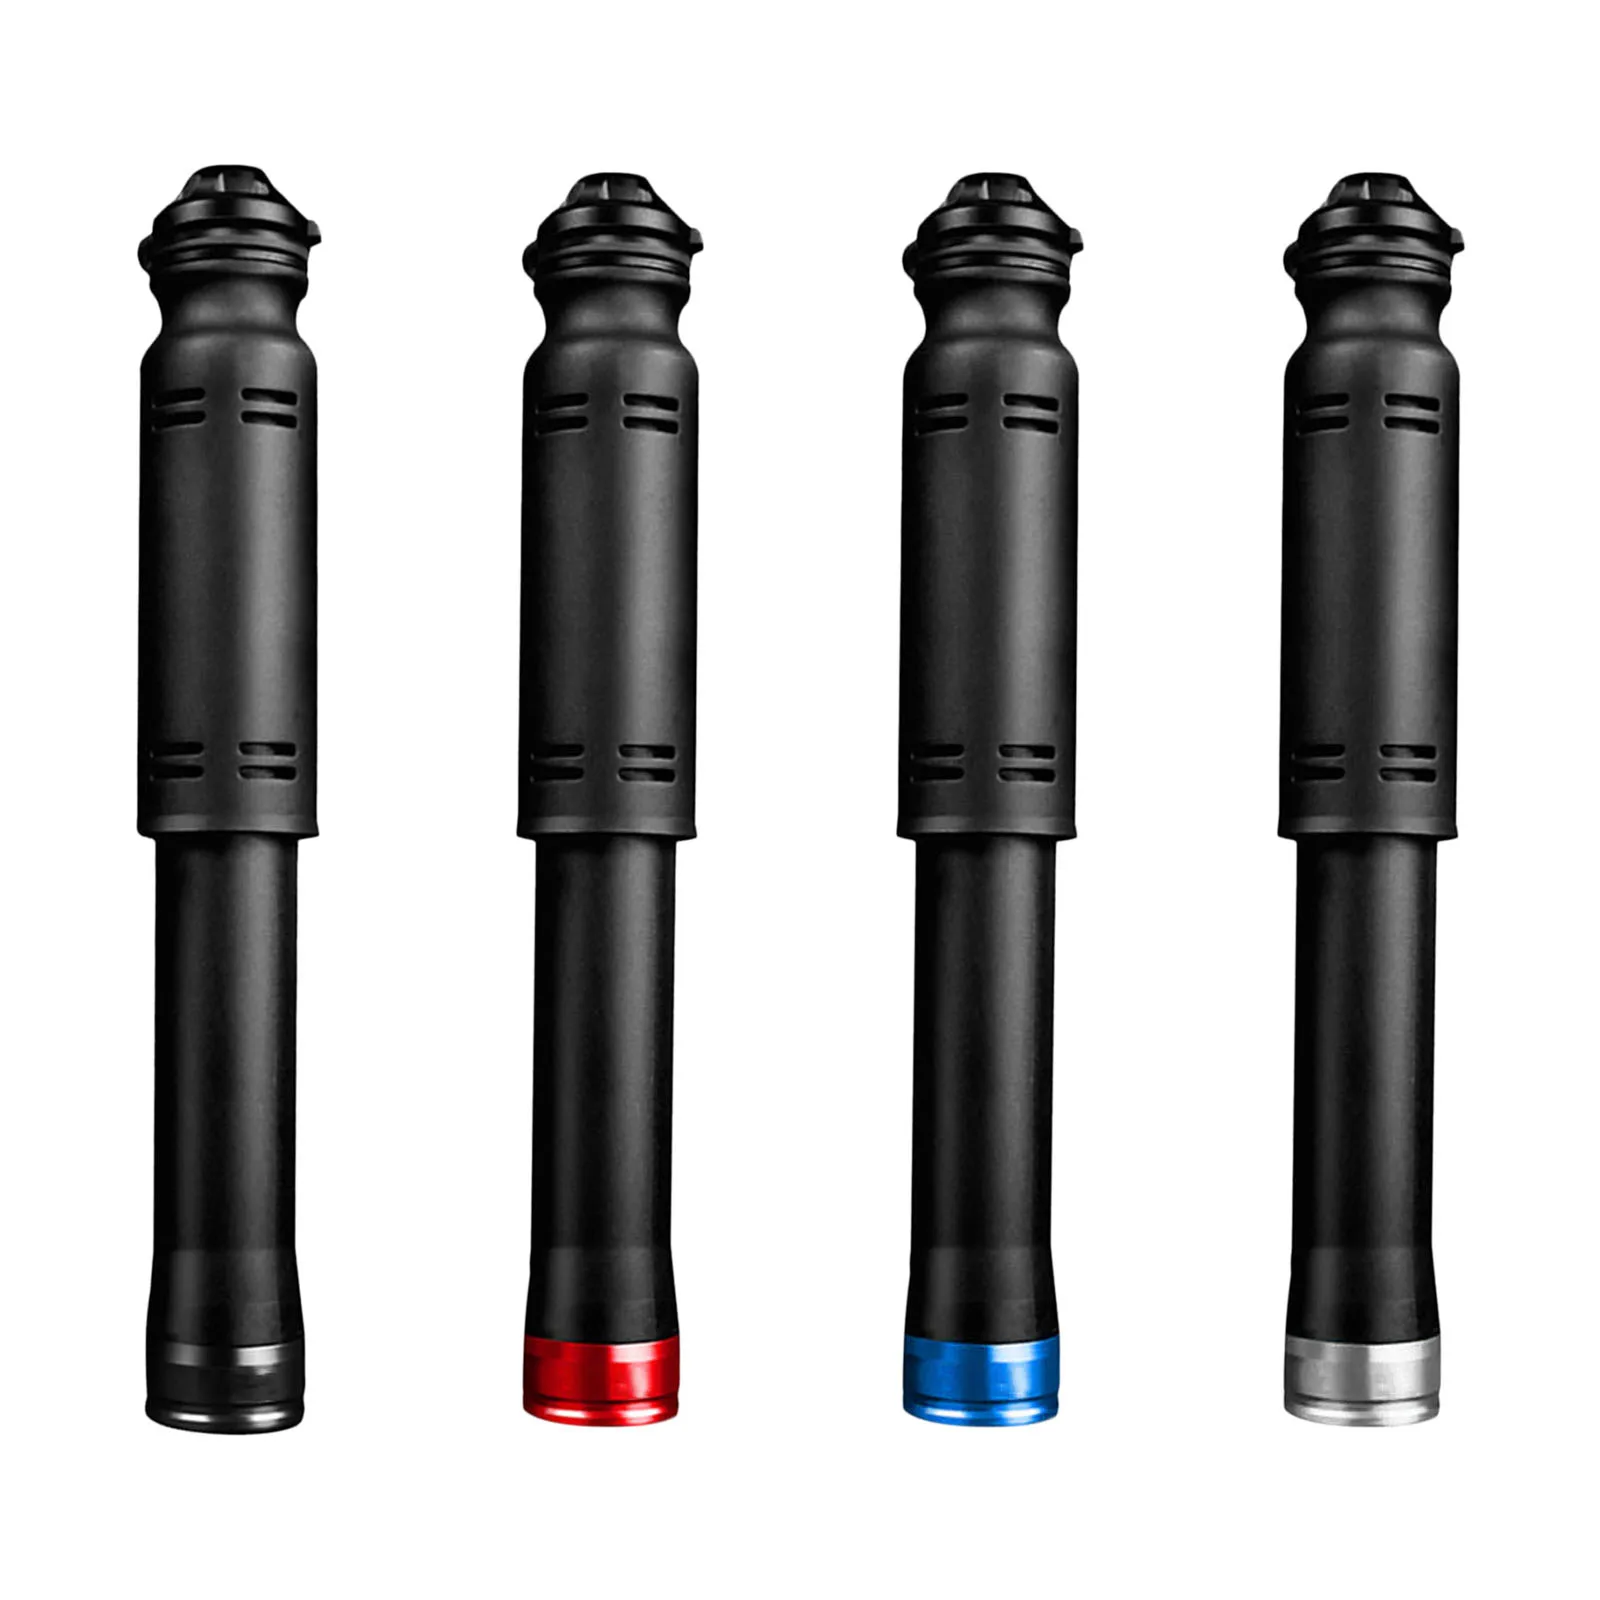 Portable Mounted Adapter Lightweight Road Pressure Valve Puncture Bicycle Pump for Bicycle MTB BMX Basketball Motorcycle